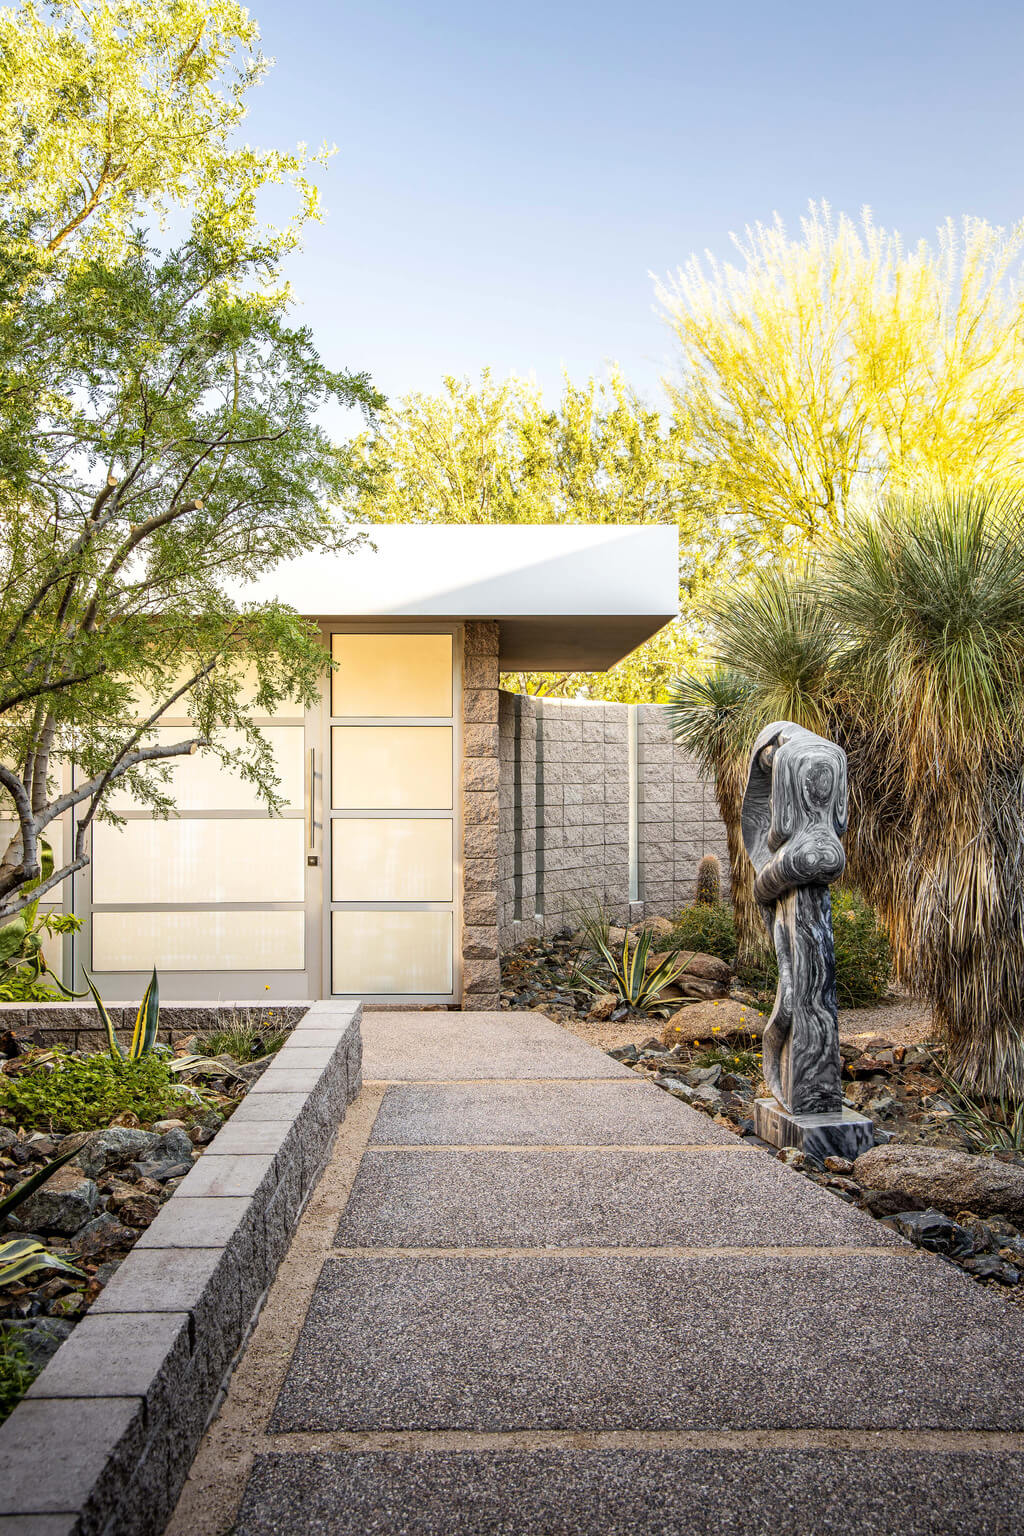 Echo Canyon Residence walkway leading to a house with a statue in front of it
